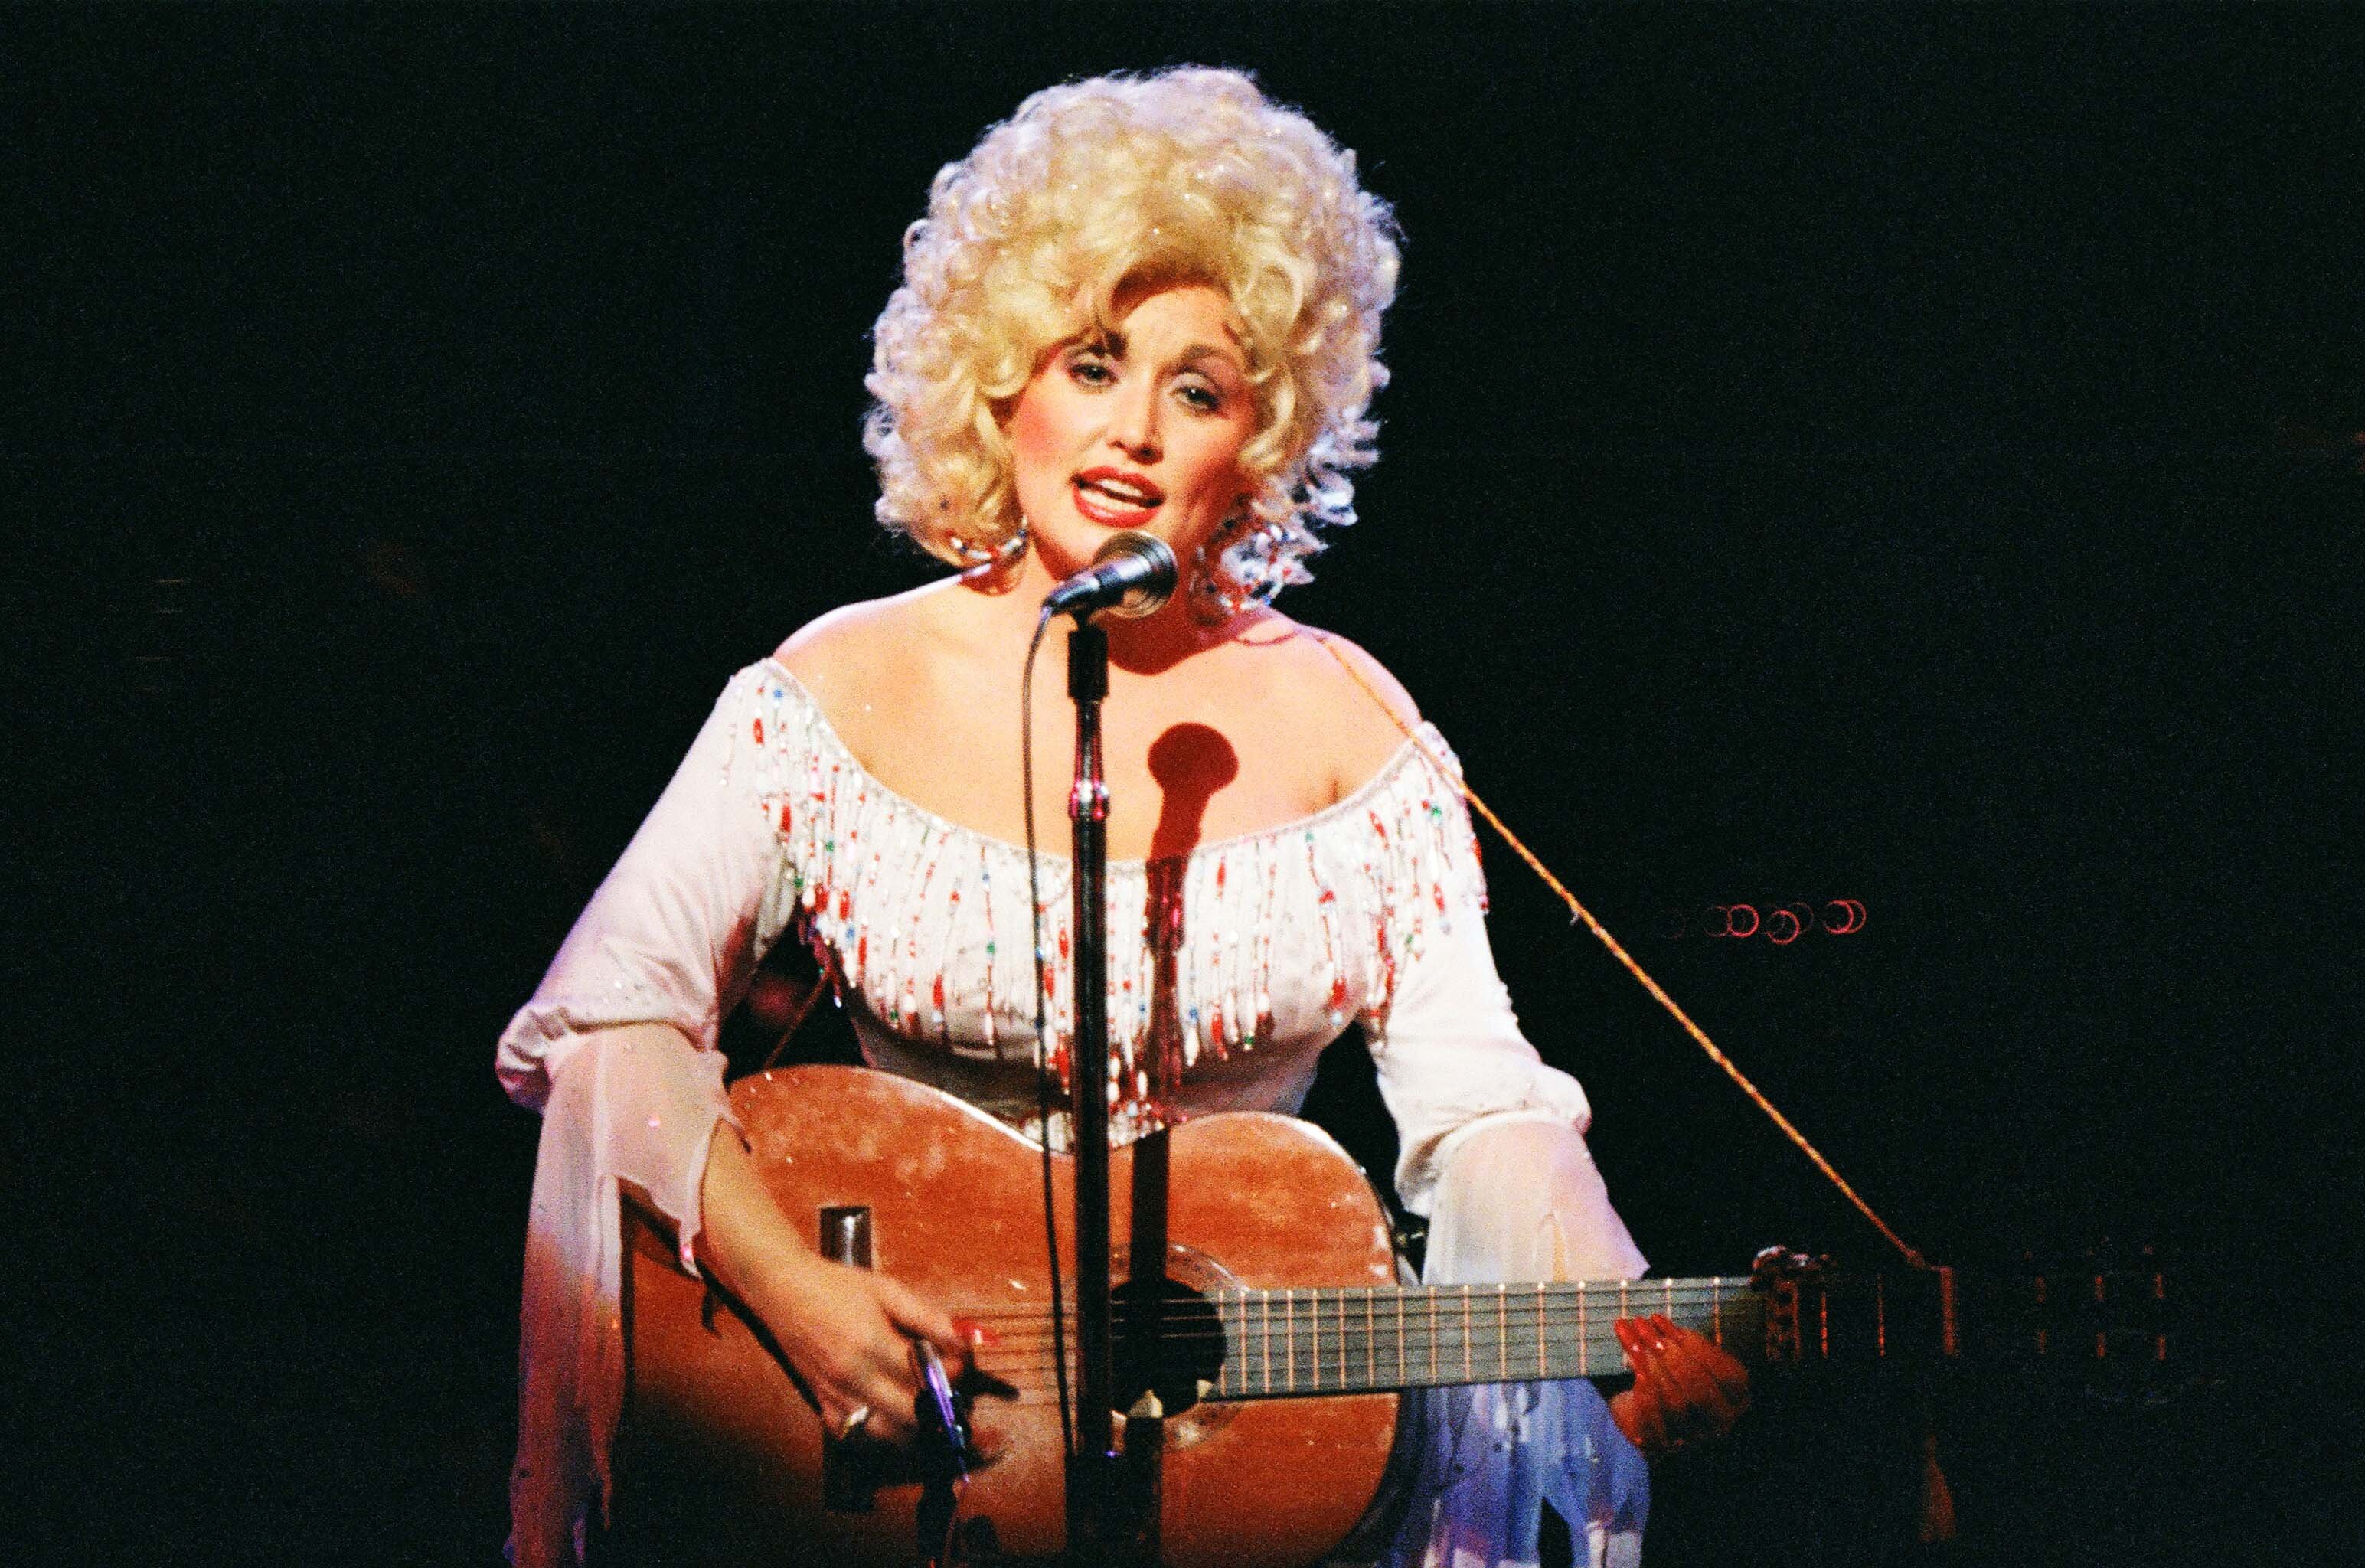 Dolly Parton wears a white dress and holds a guitar.